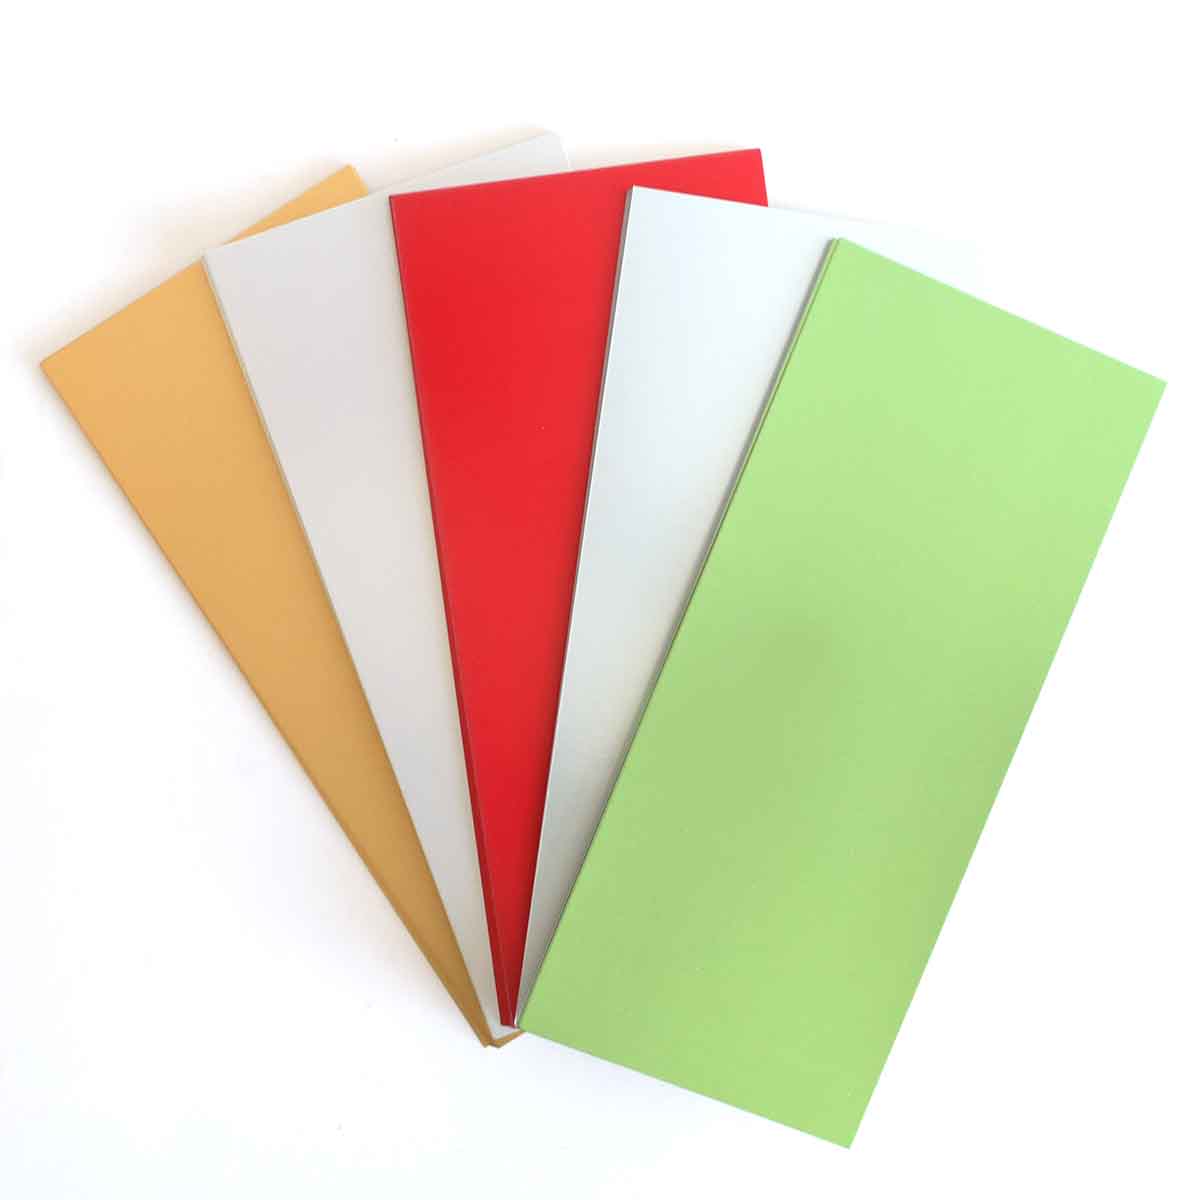 four different colors of paper on a white surface.